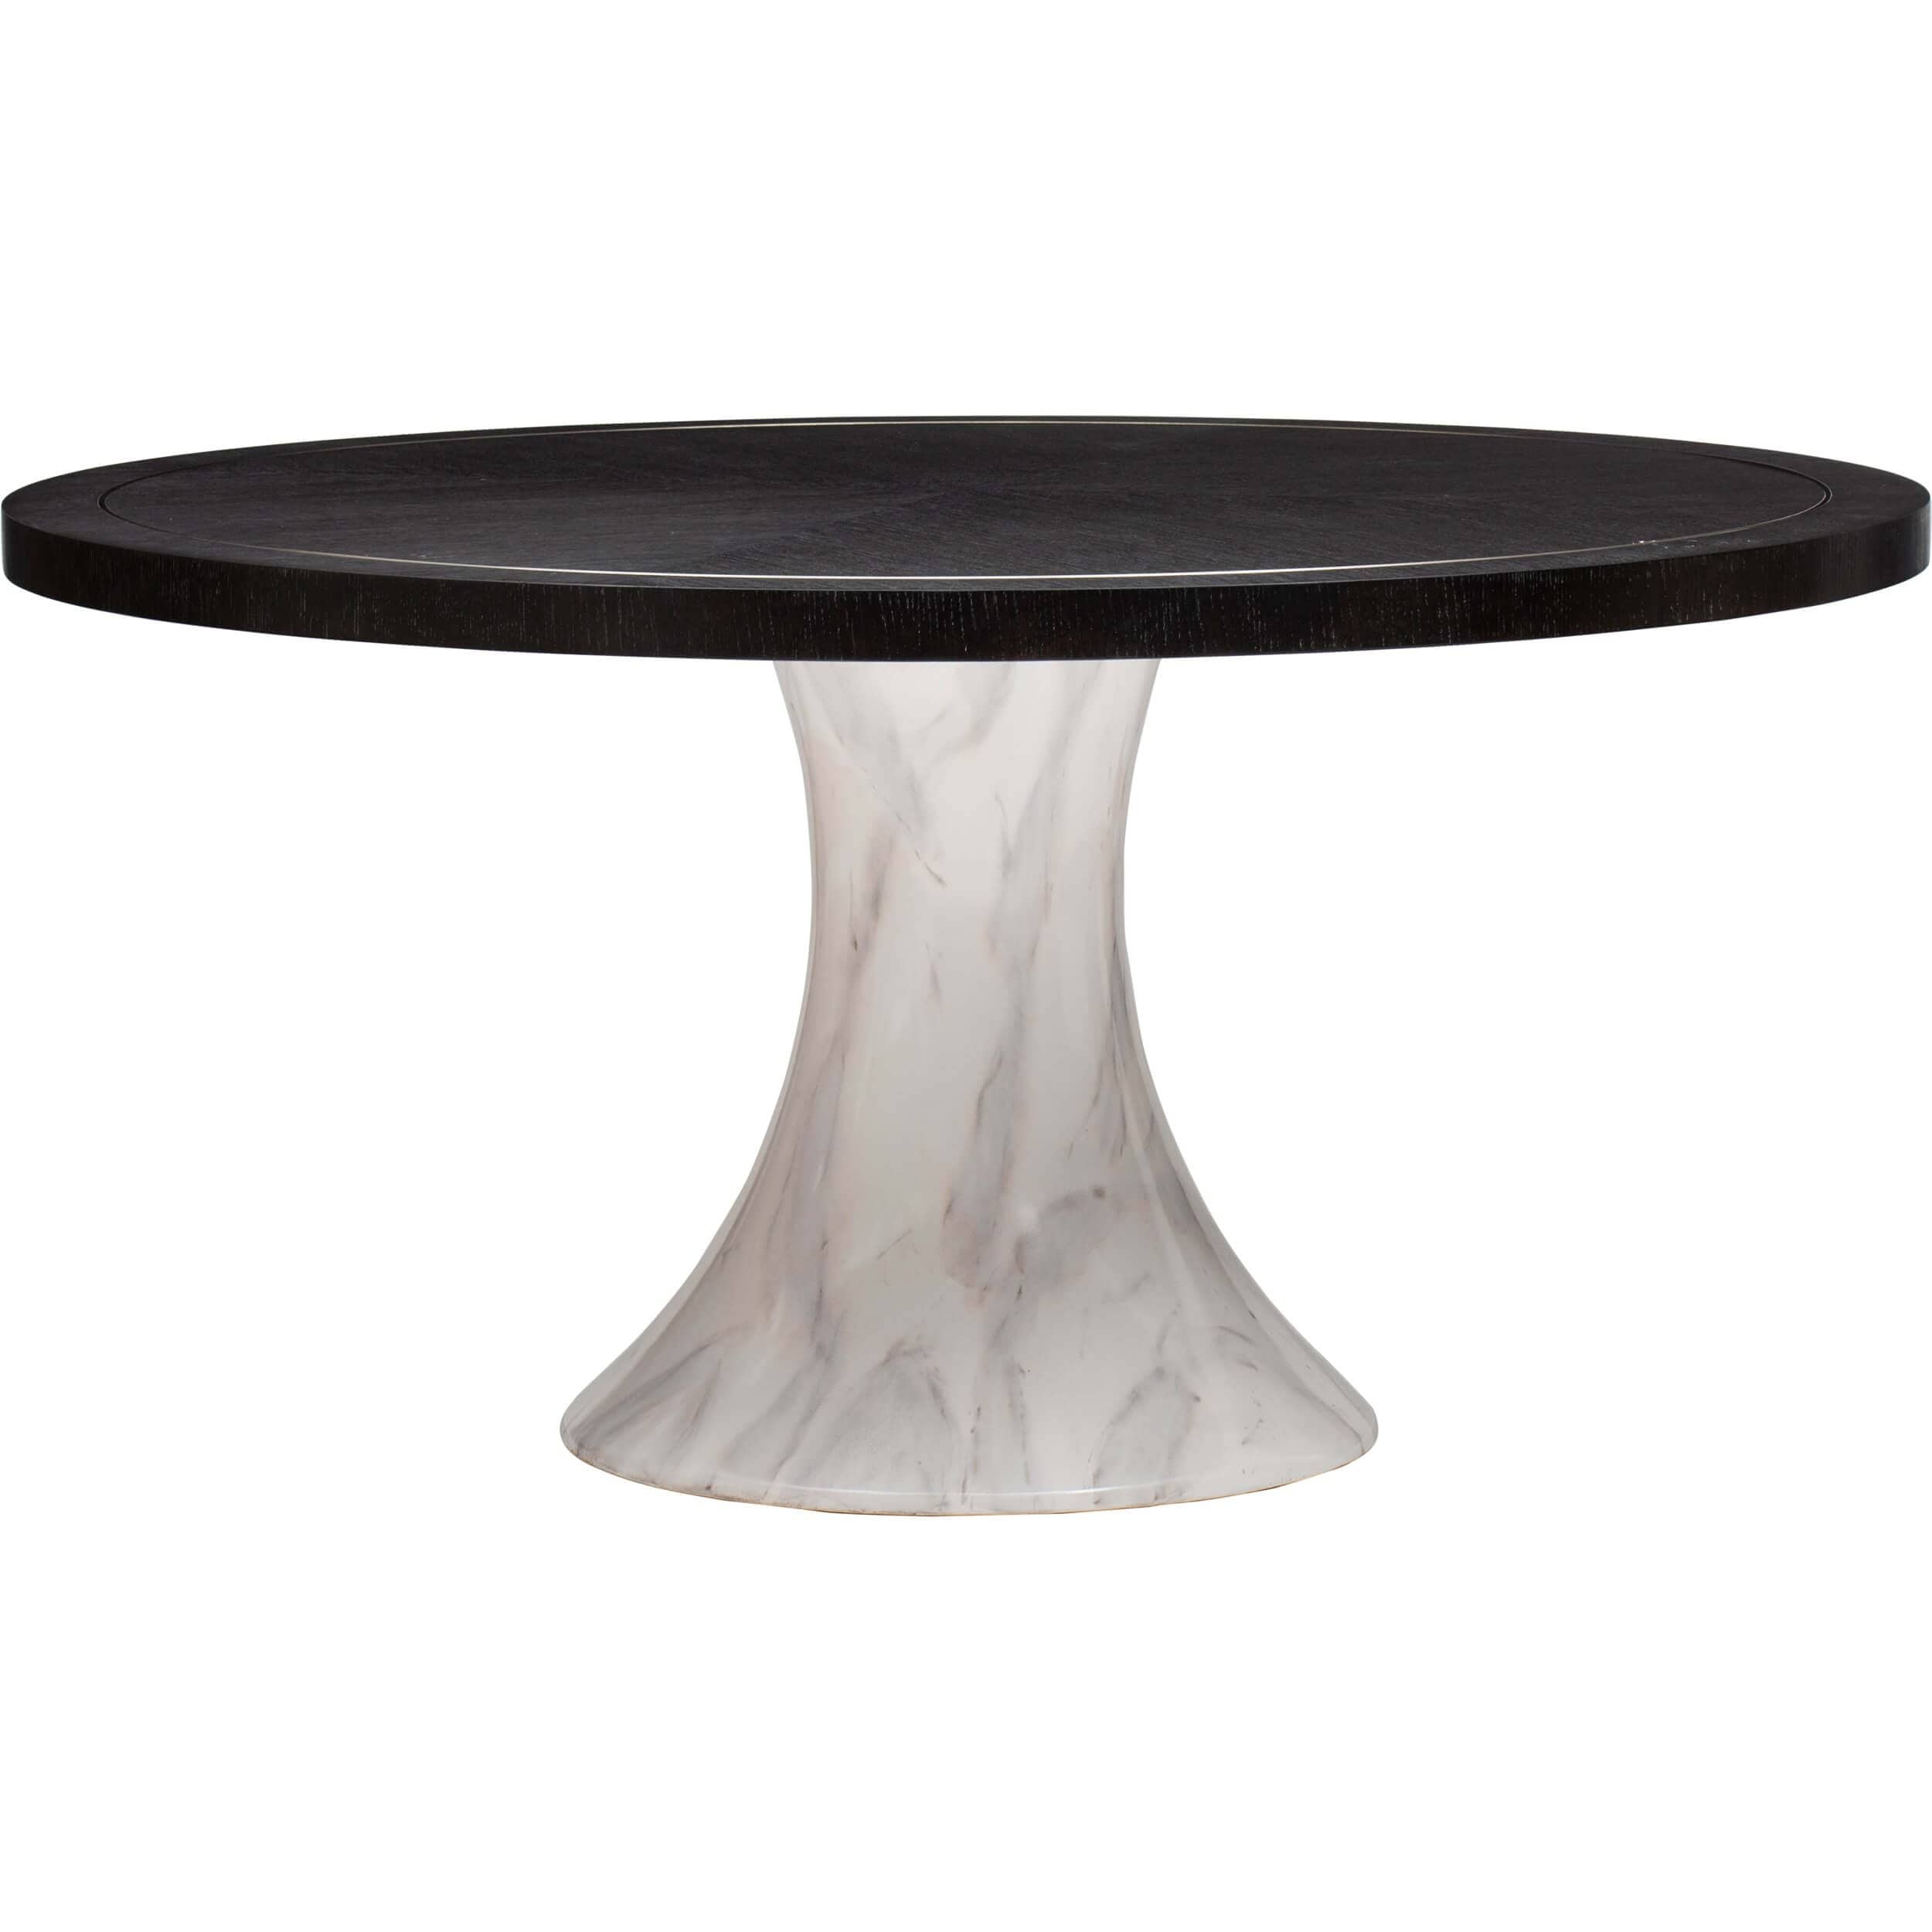 Image of Decorage Round Dining Table